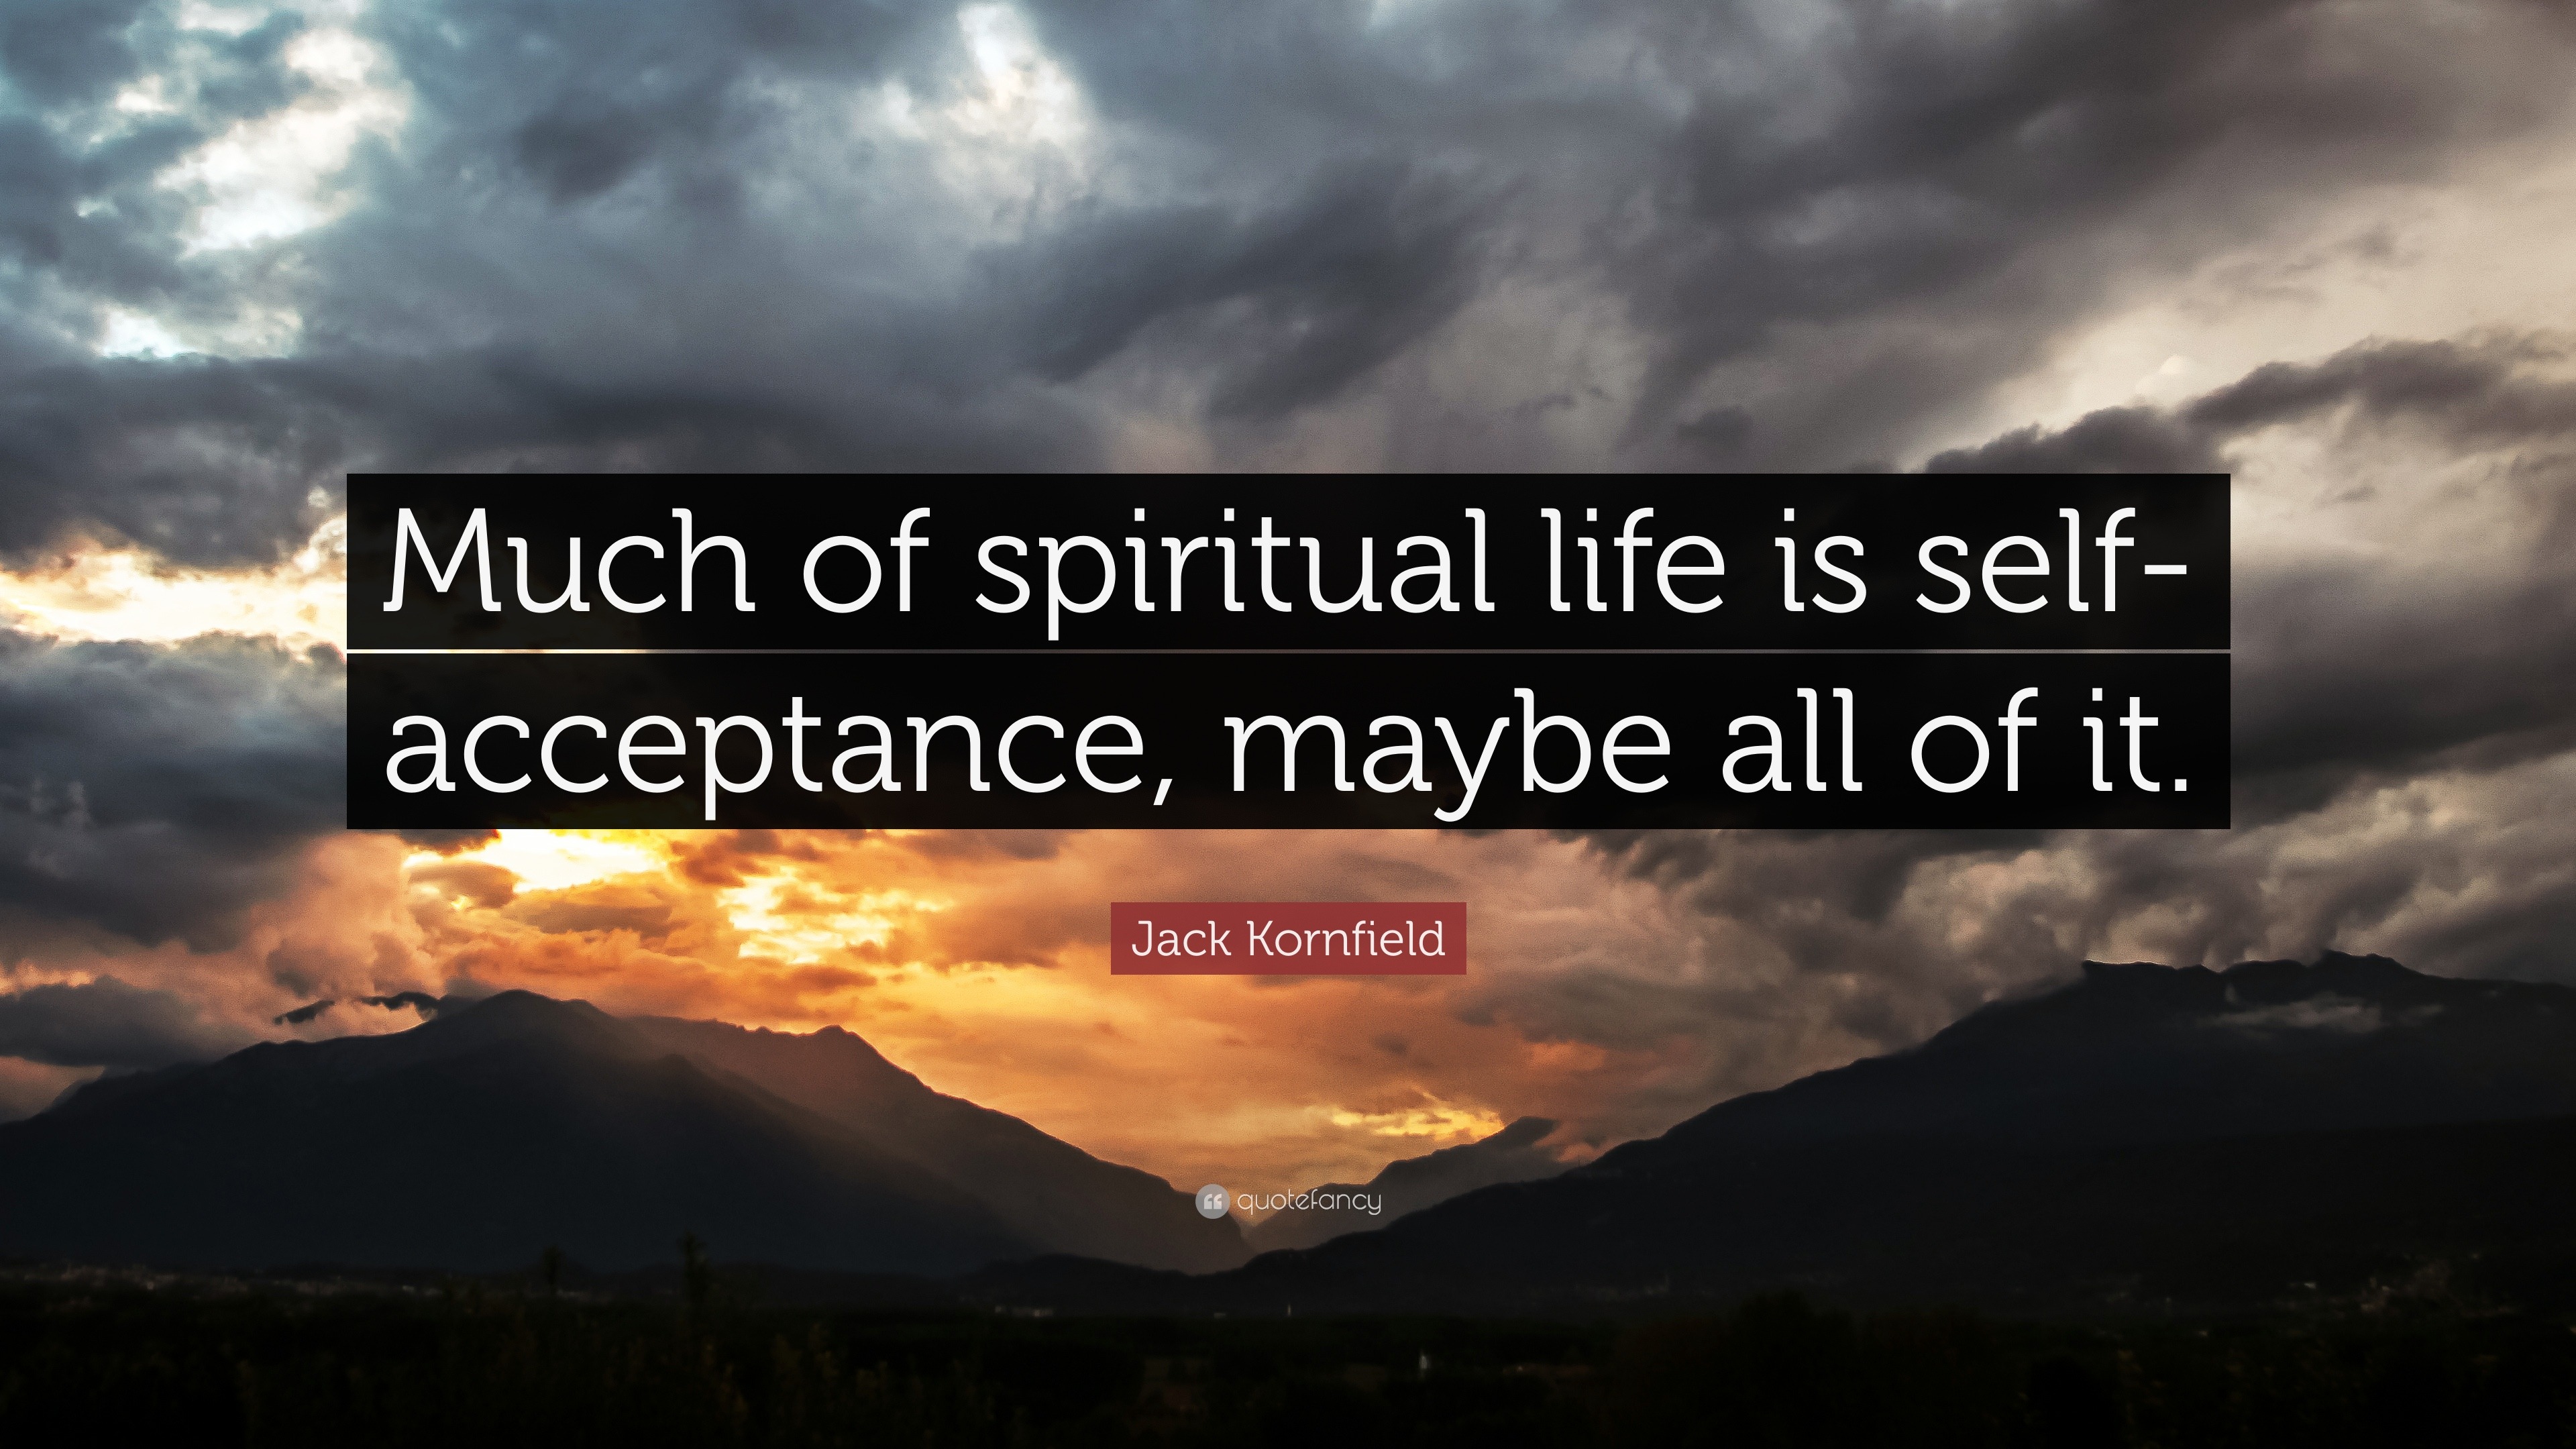 Jack Kornfield Quote: “Much of spiritual life is self-acceptance, maybe ...